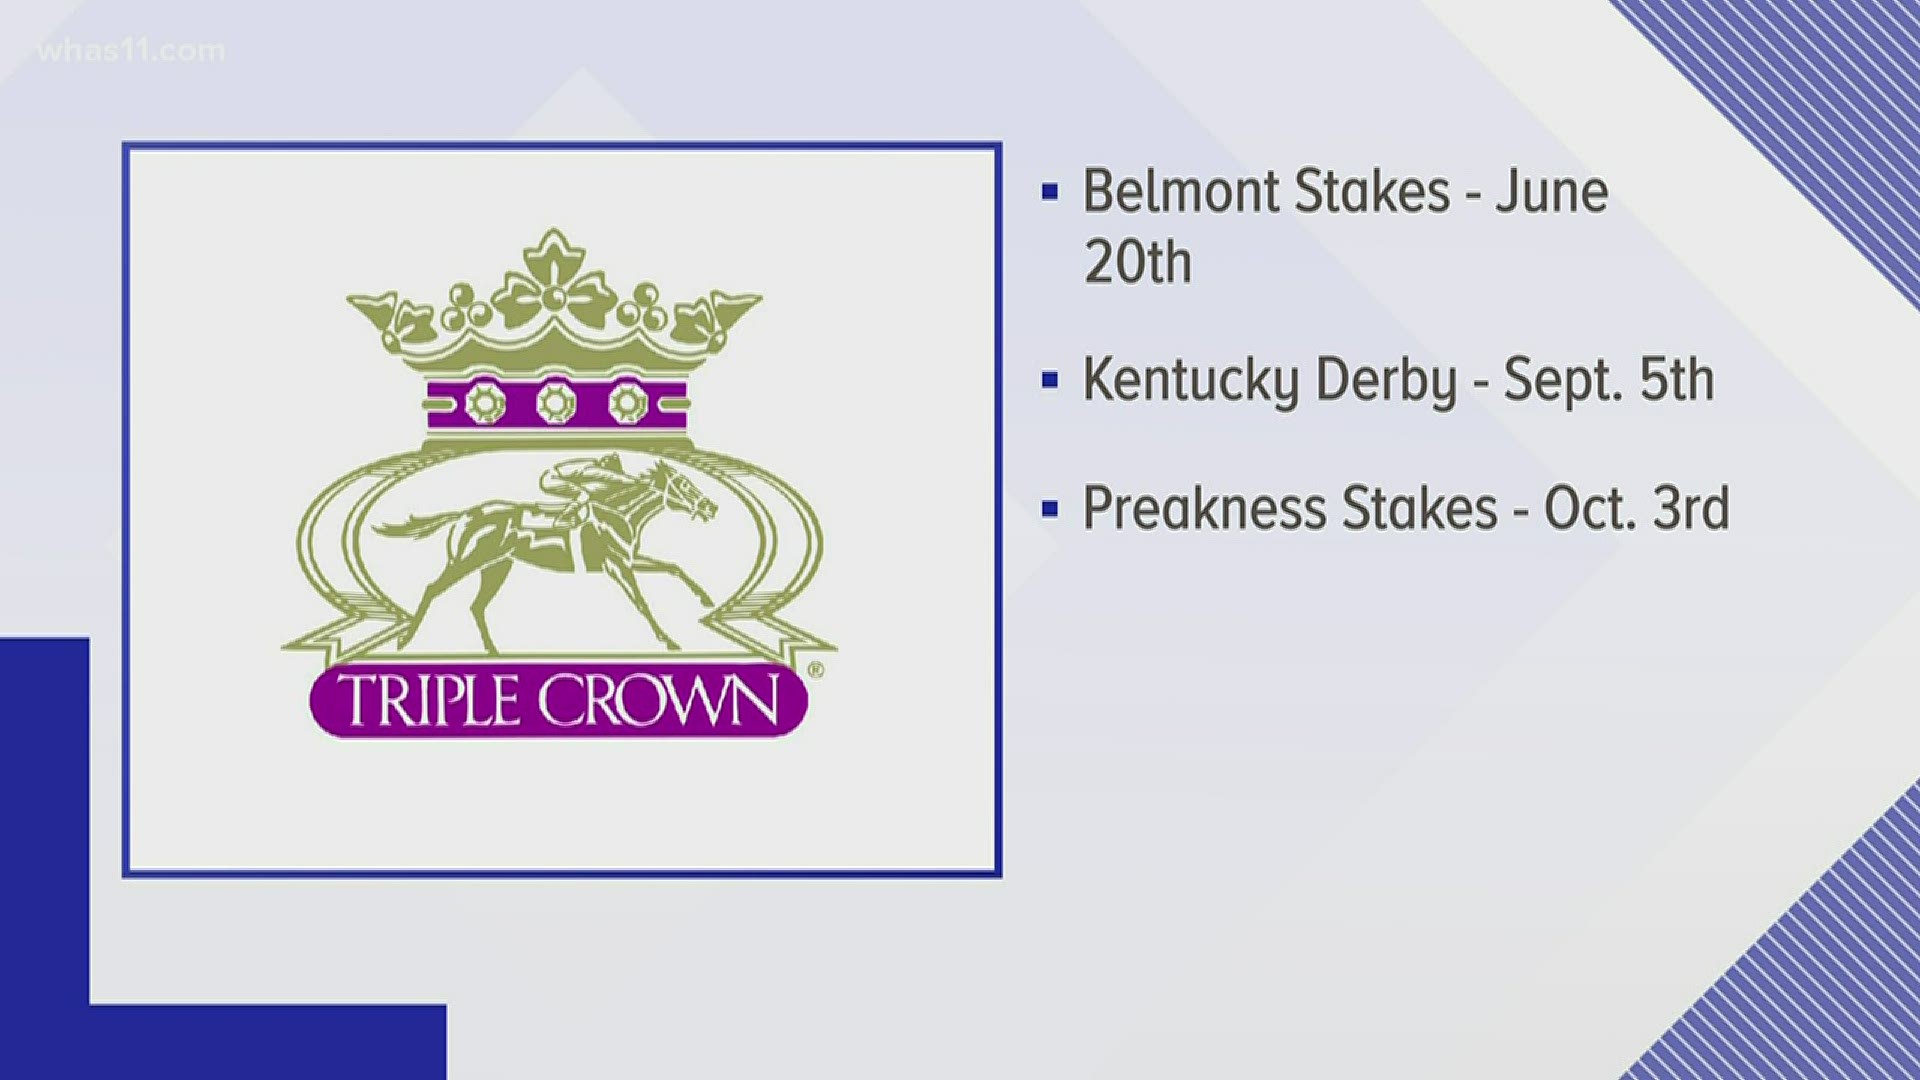 The Triple Crown is going to be even more different this year.